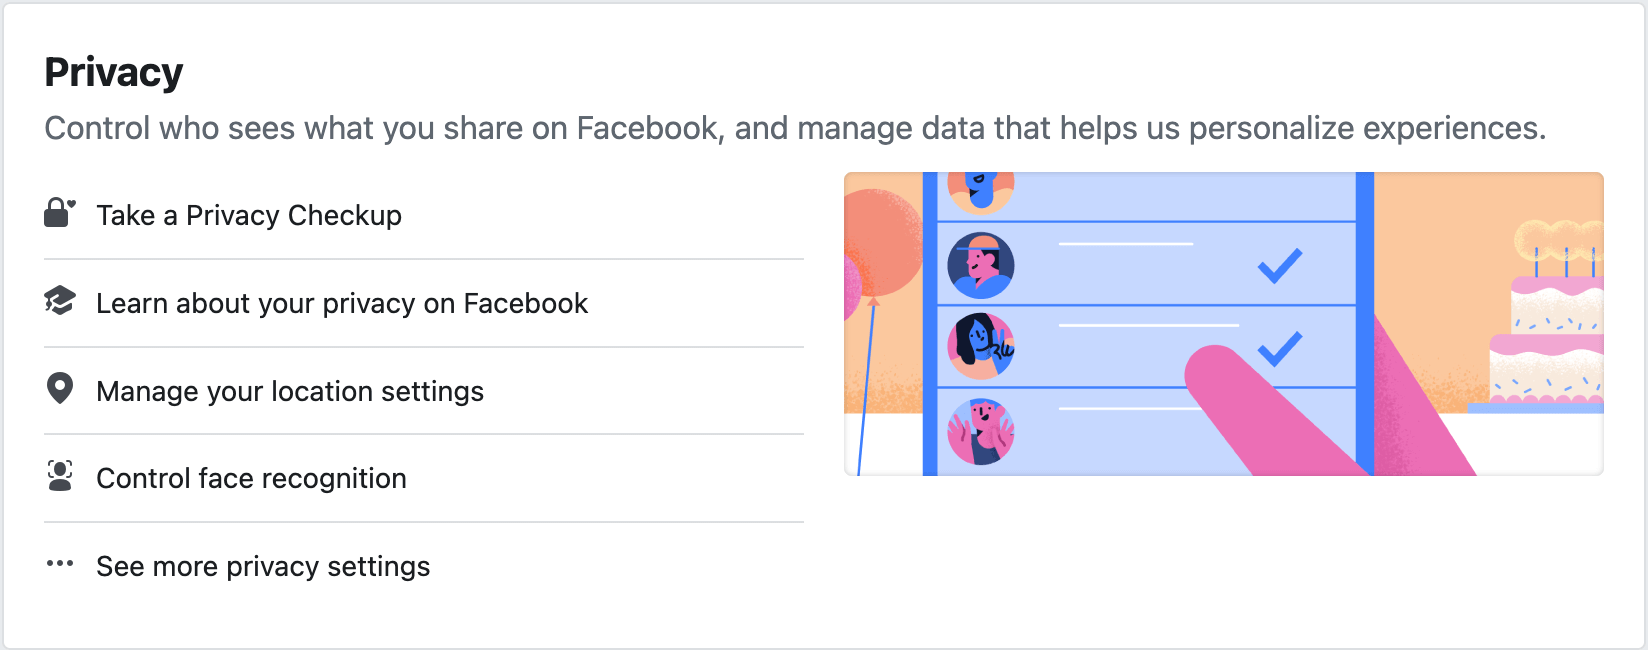 Facebook's privacy settings